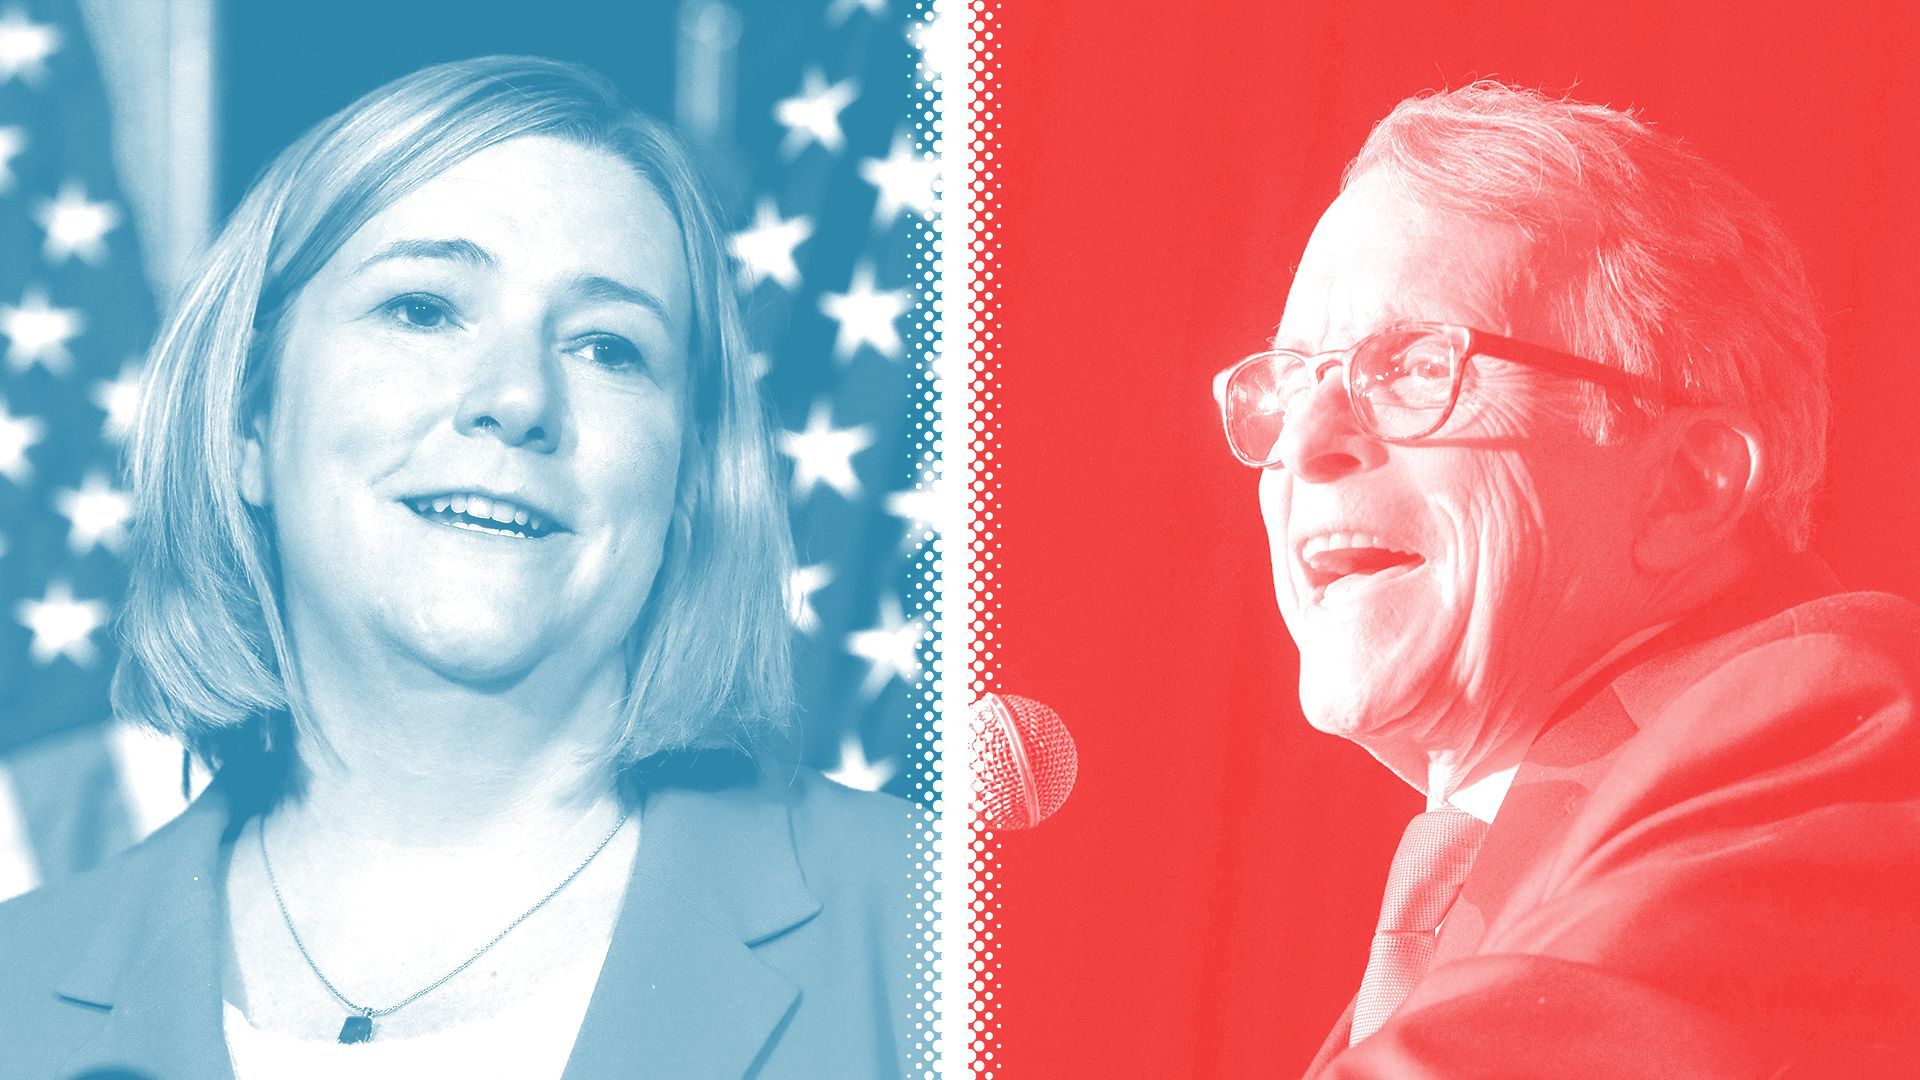 Photo illustration of Nan Whaley, tinted blue, and Mike DeWine, tinted red, separated by a white halftone divider.